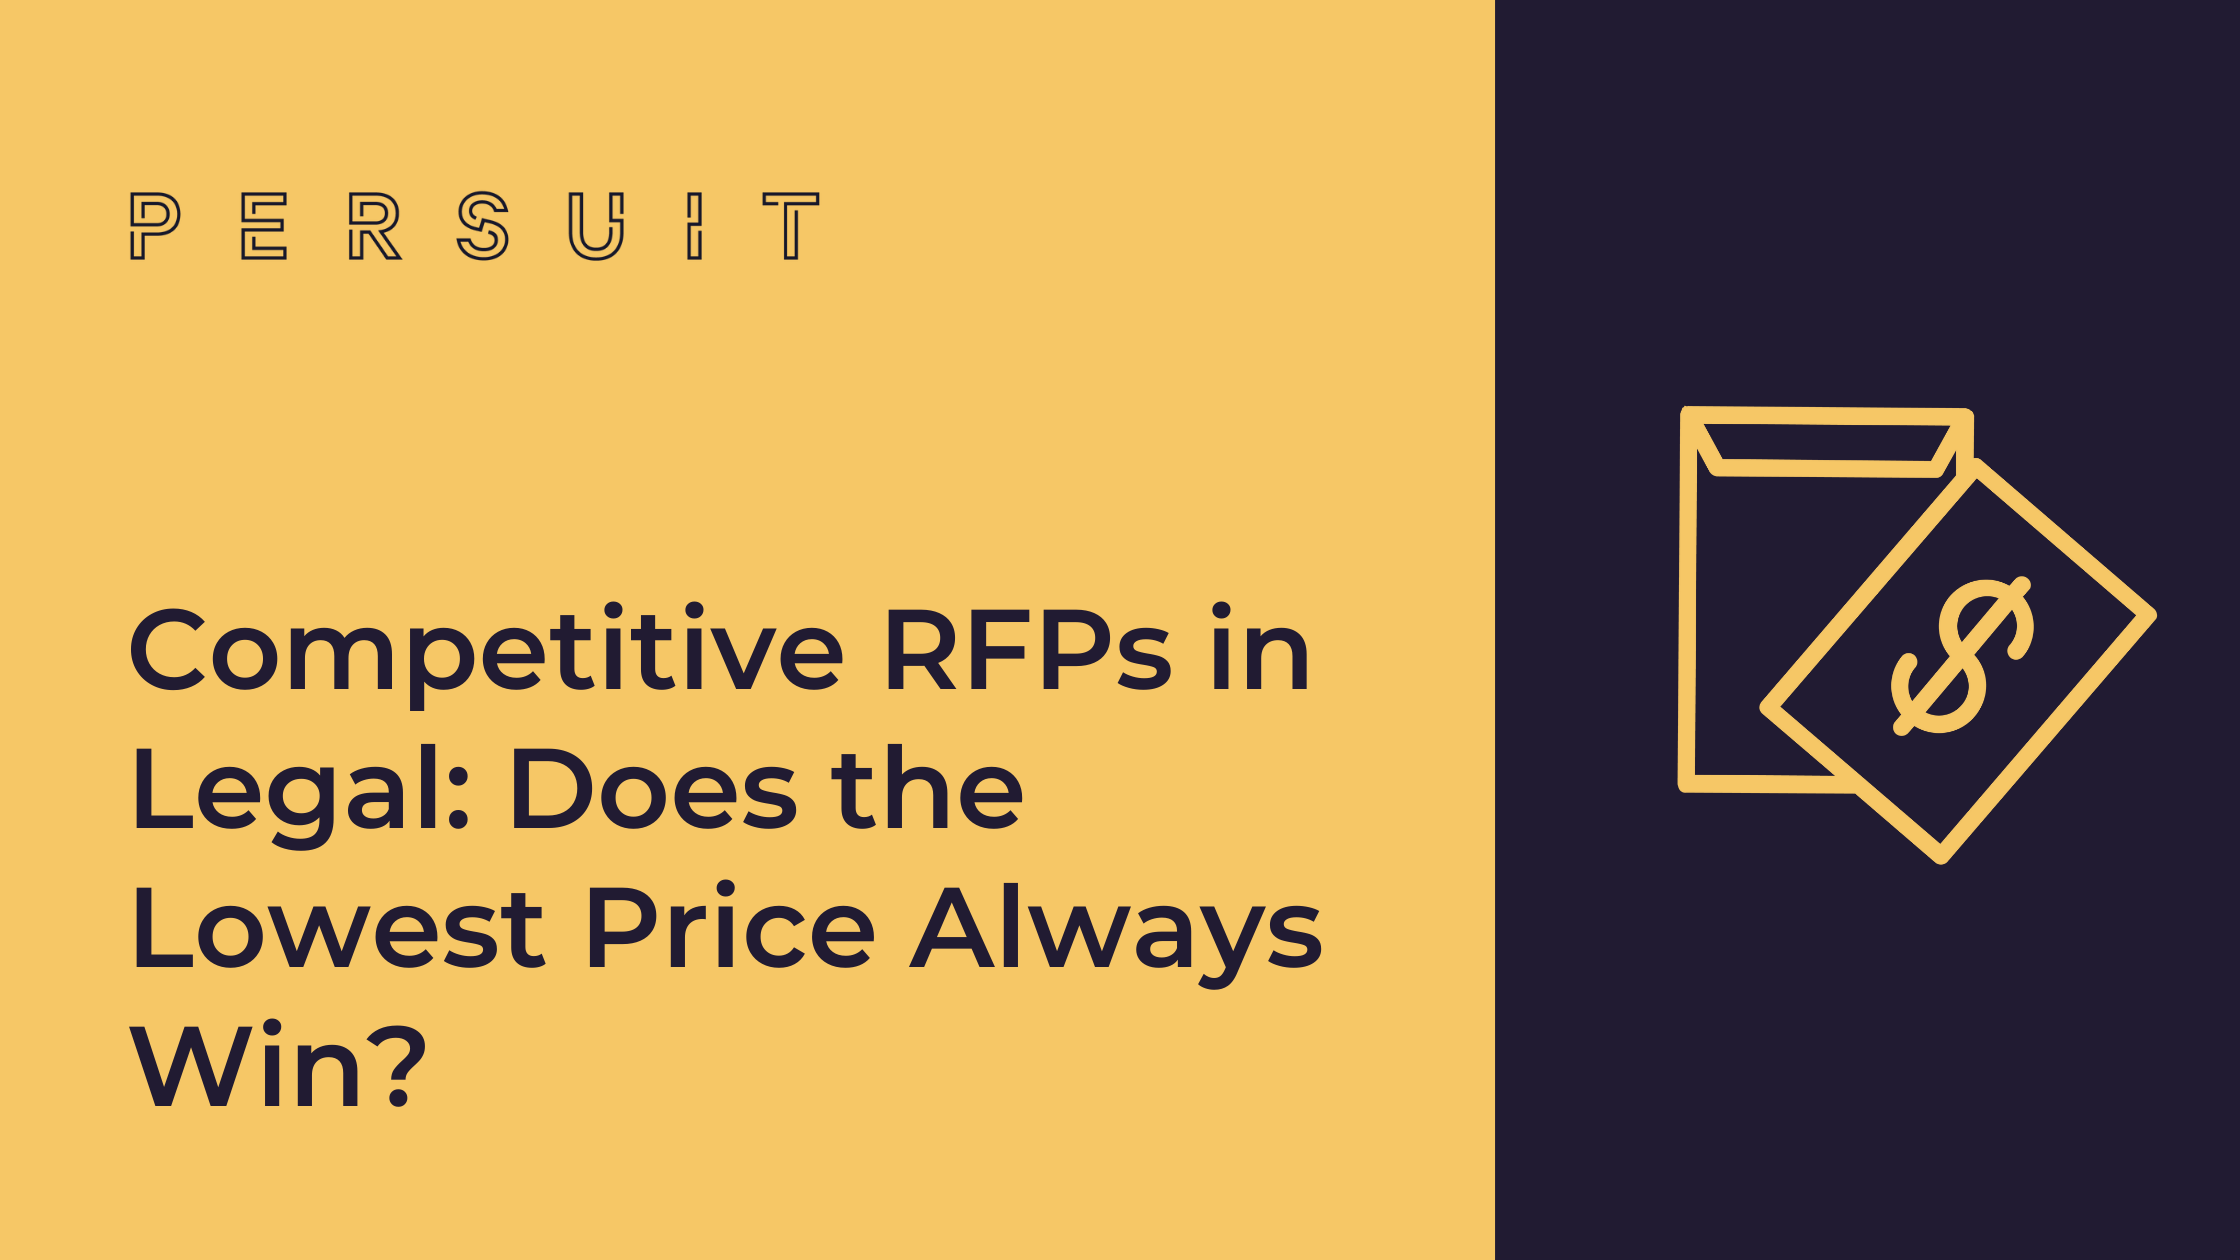 Competitive RFPs in Legal: Does the Lowest Price Always Win?